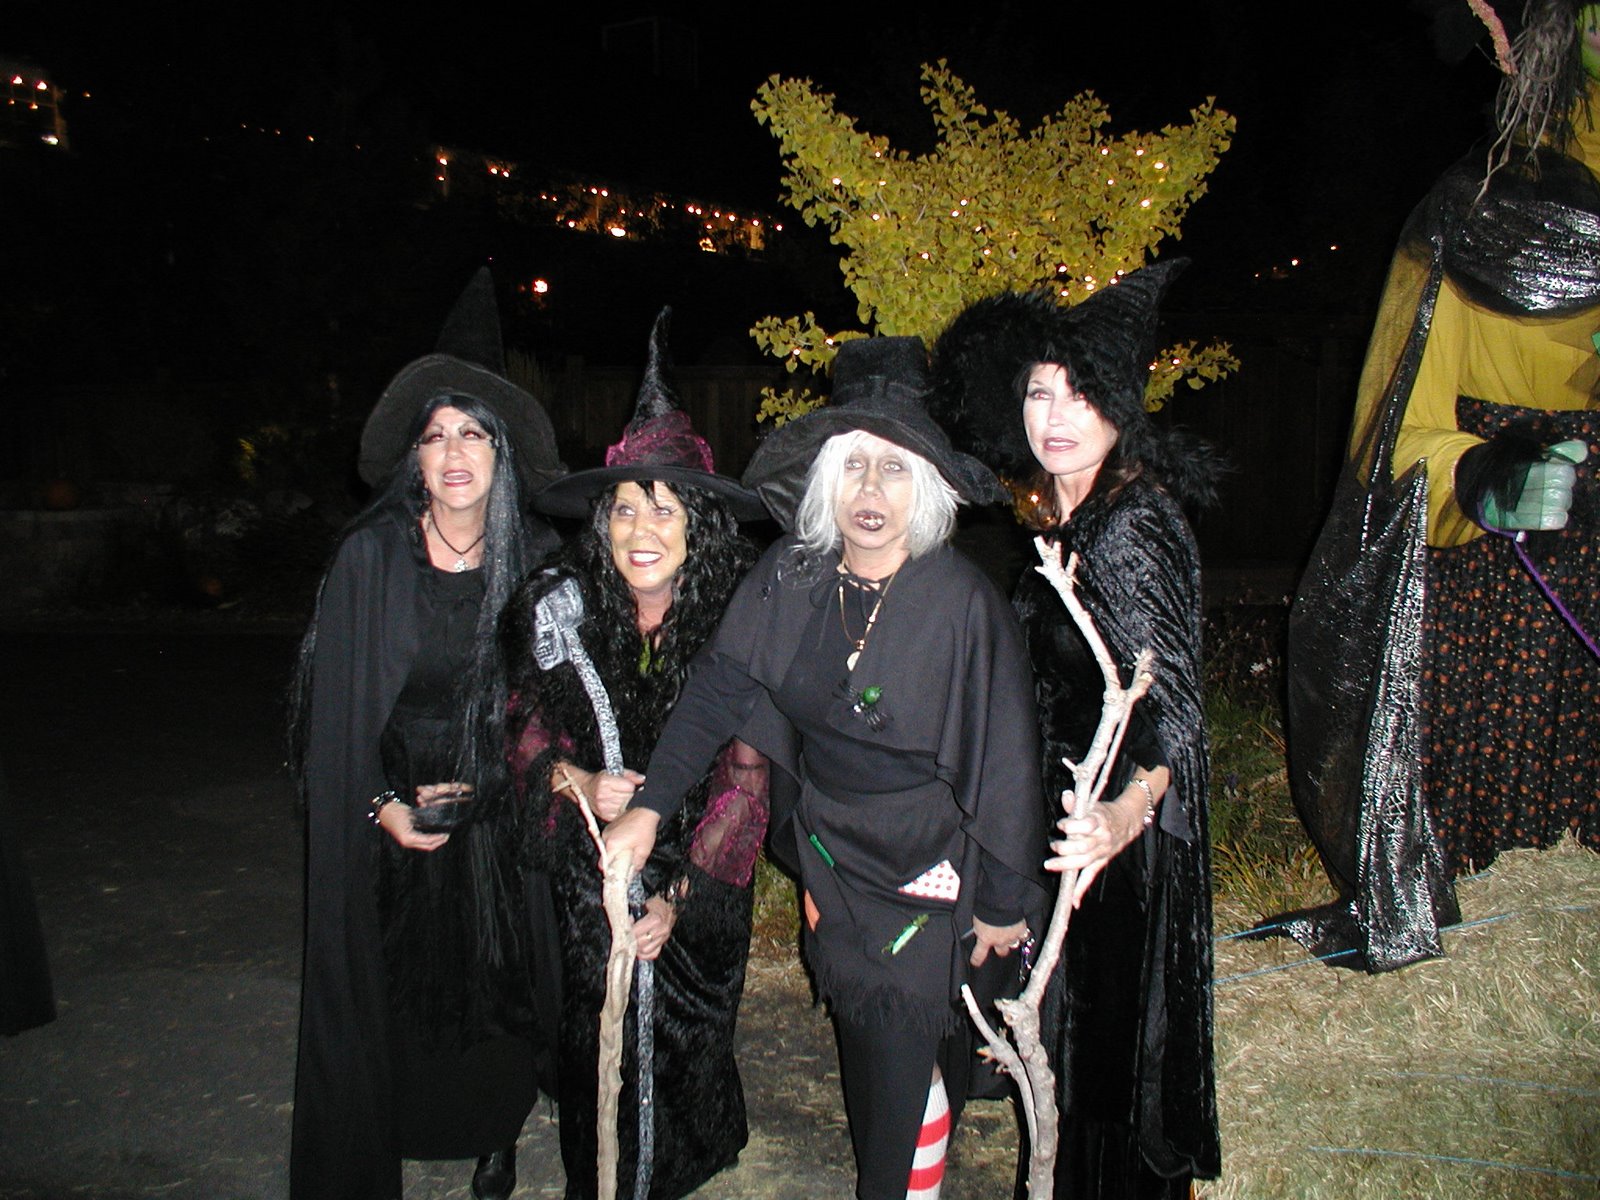 [Witches+Oct+2005+005.jpg]